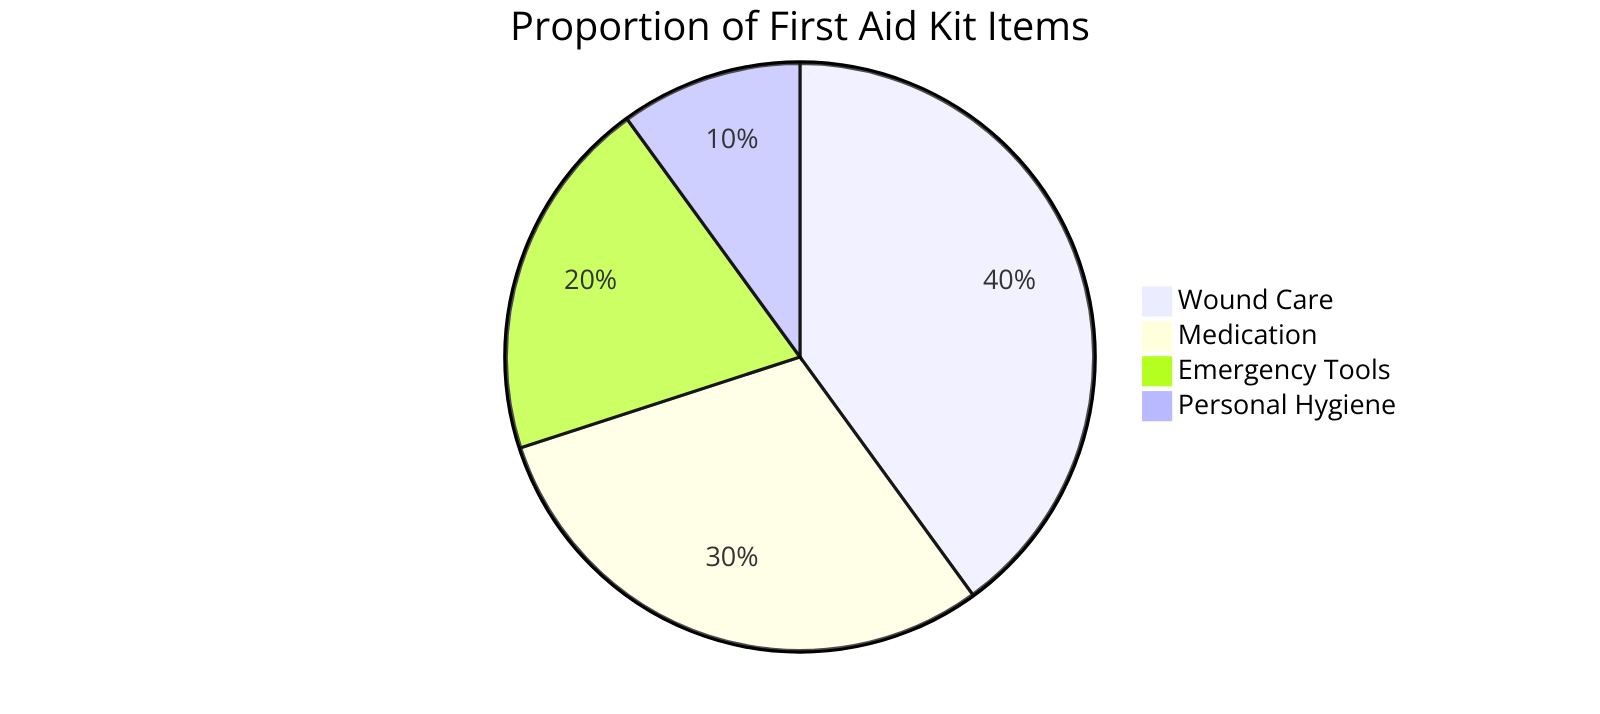 the proportion of first aid kit items dedicated to different types of medical needs